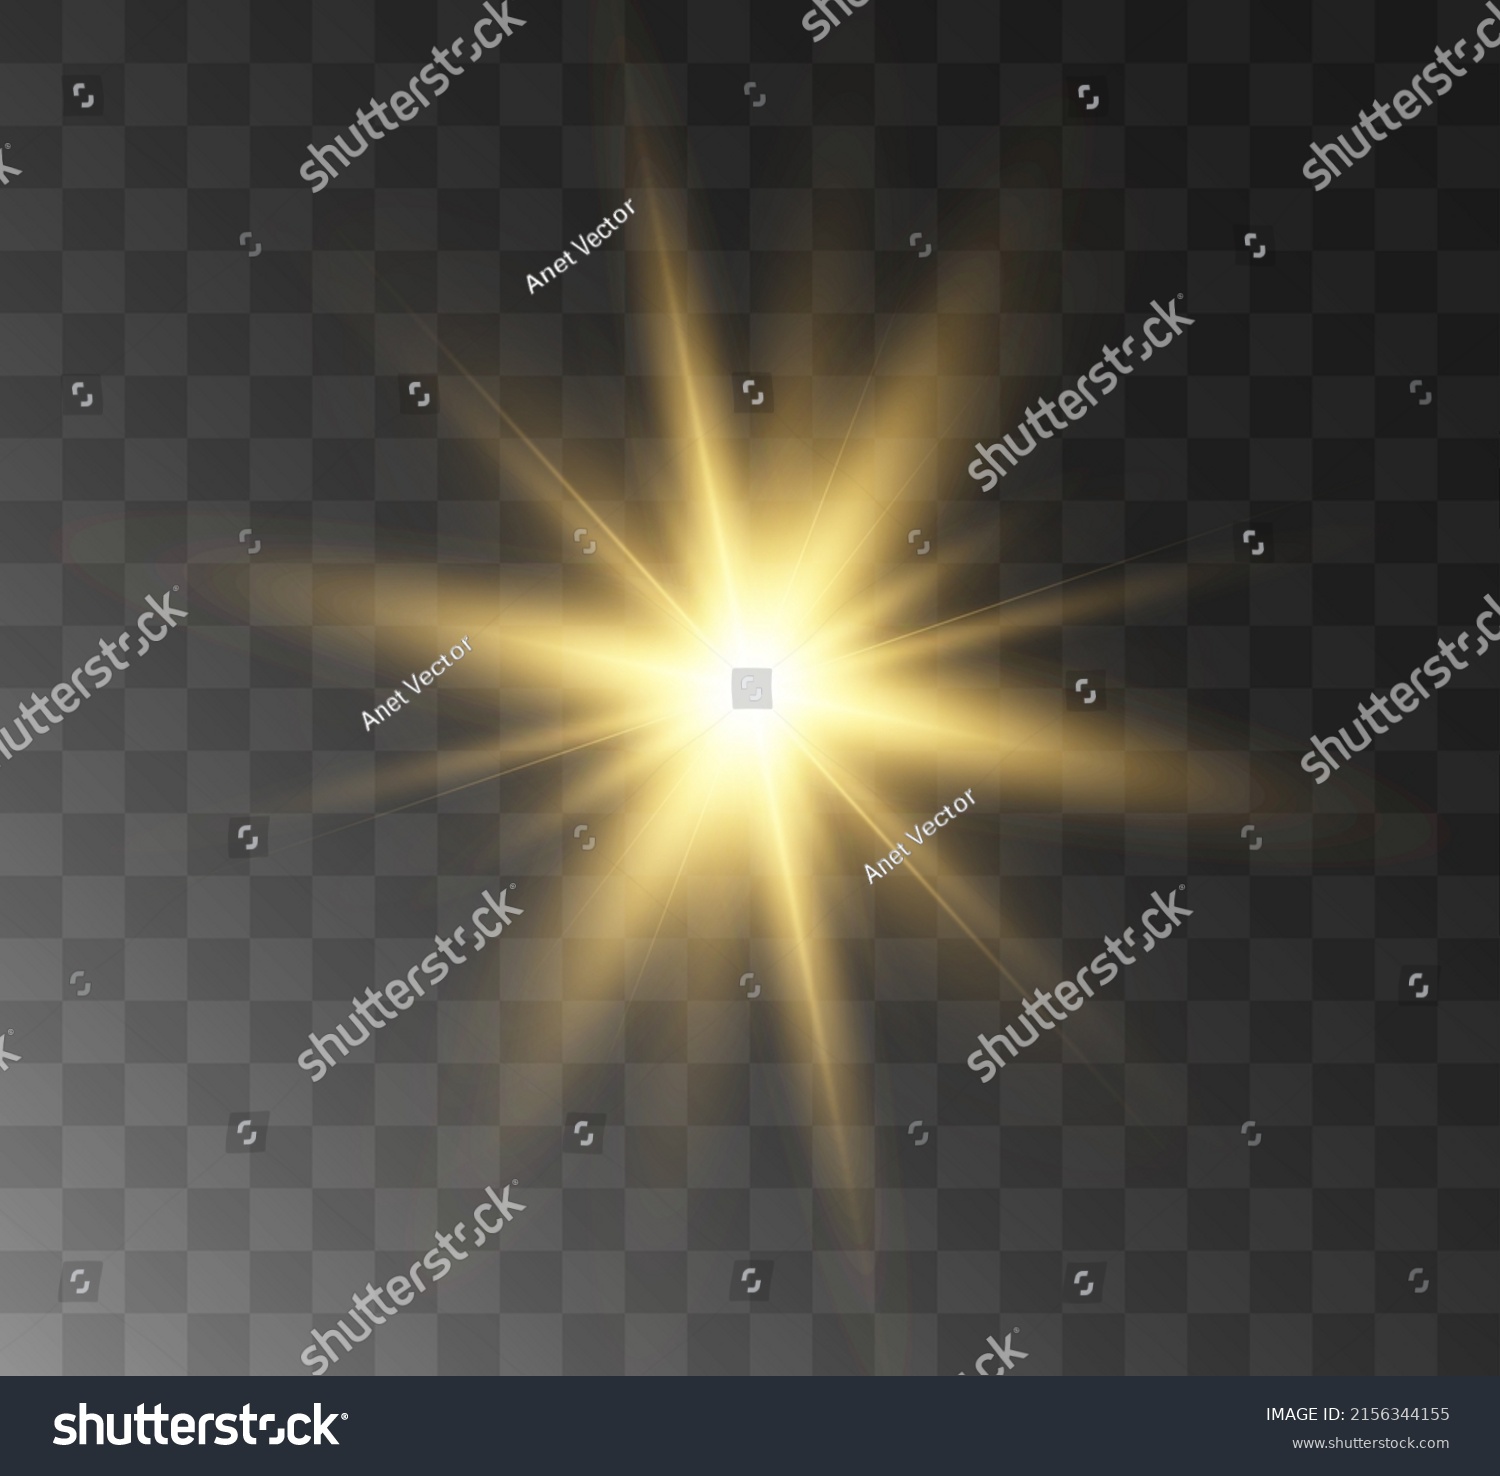 Light flare effect isolated on transparent background. Lens flare, sparkles, bokeh, shining star with rays concept. Abstract luminous explosion #2156344155